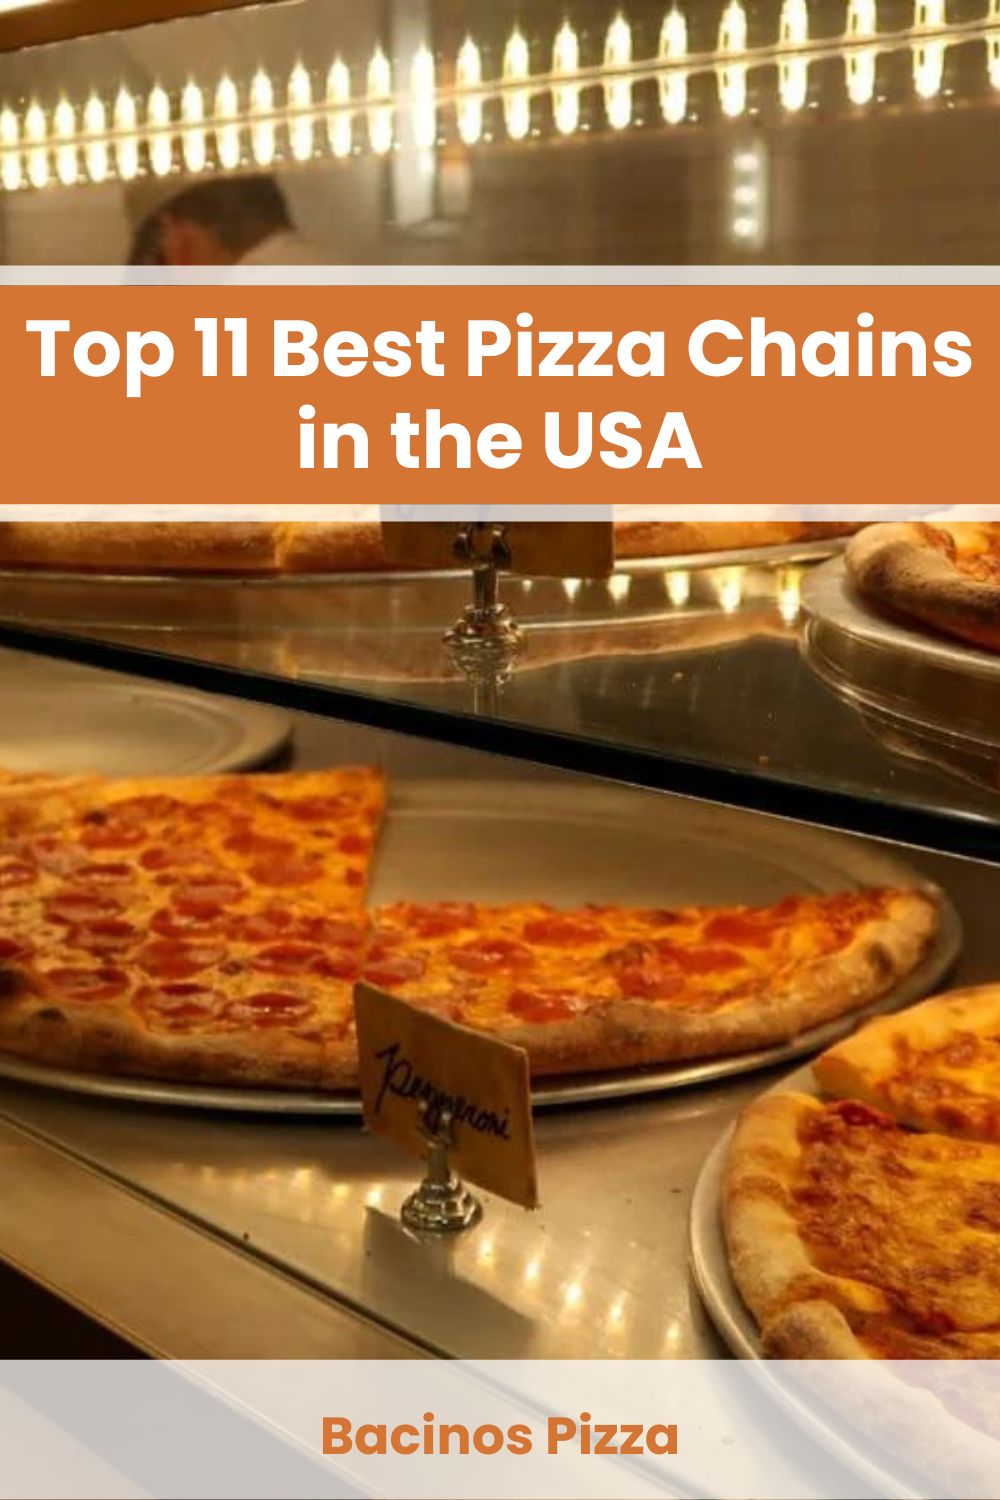 Best Pizza Chains in the USA